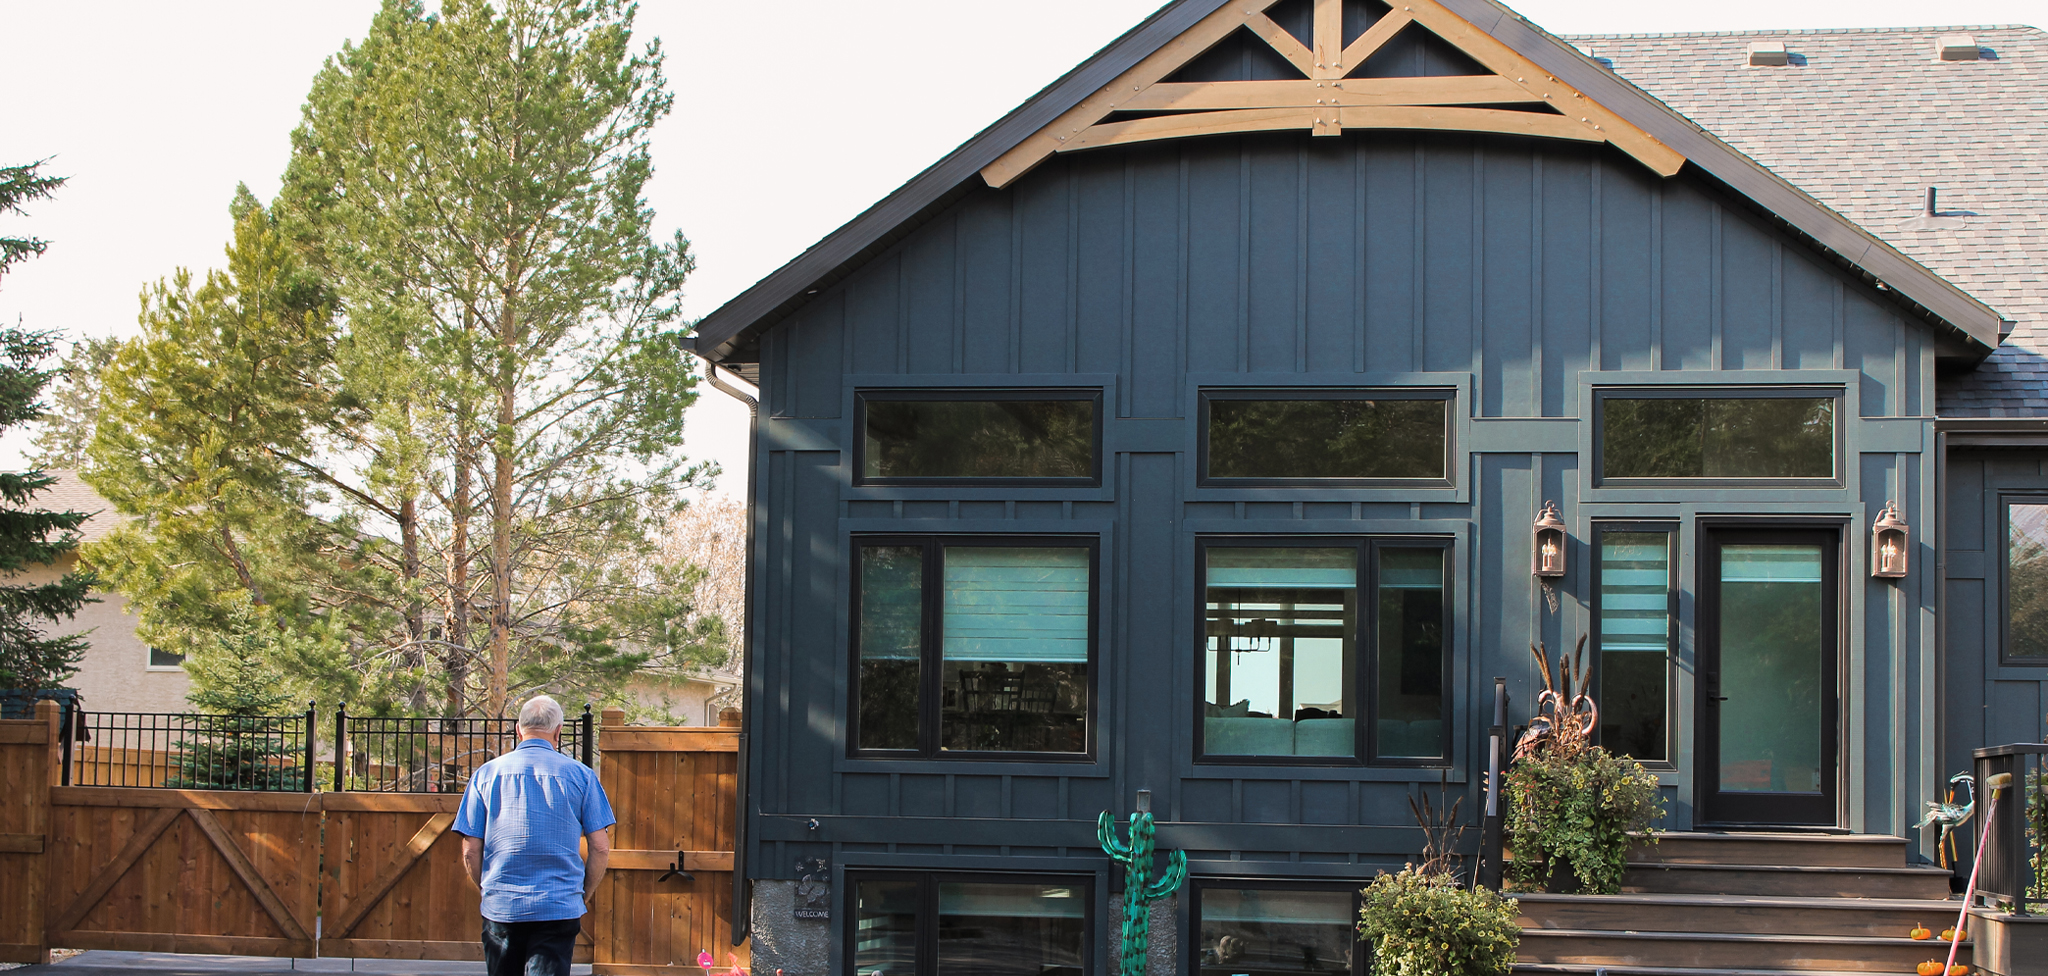 WARRANTIES to Consider When Selecting Your Exterior Materials